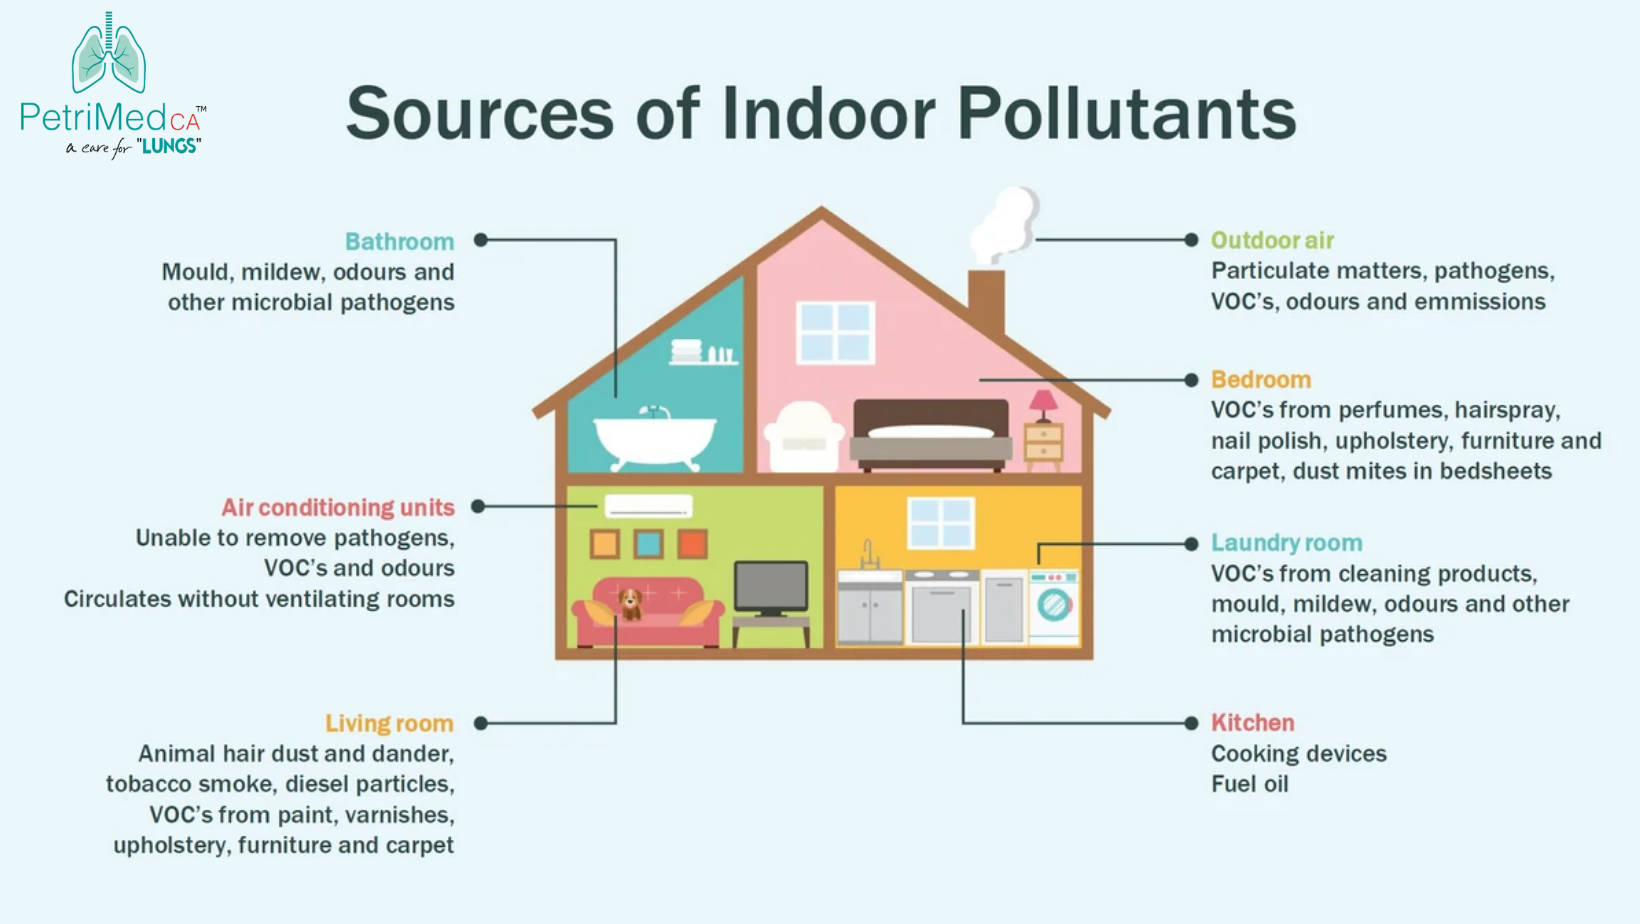 Ultrafine Particles in Indoor Air: Sources and Solutions - Petrimed CA air purification system